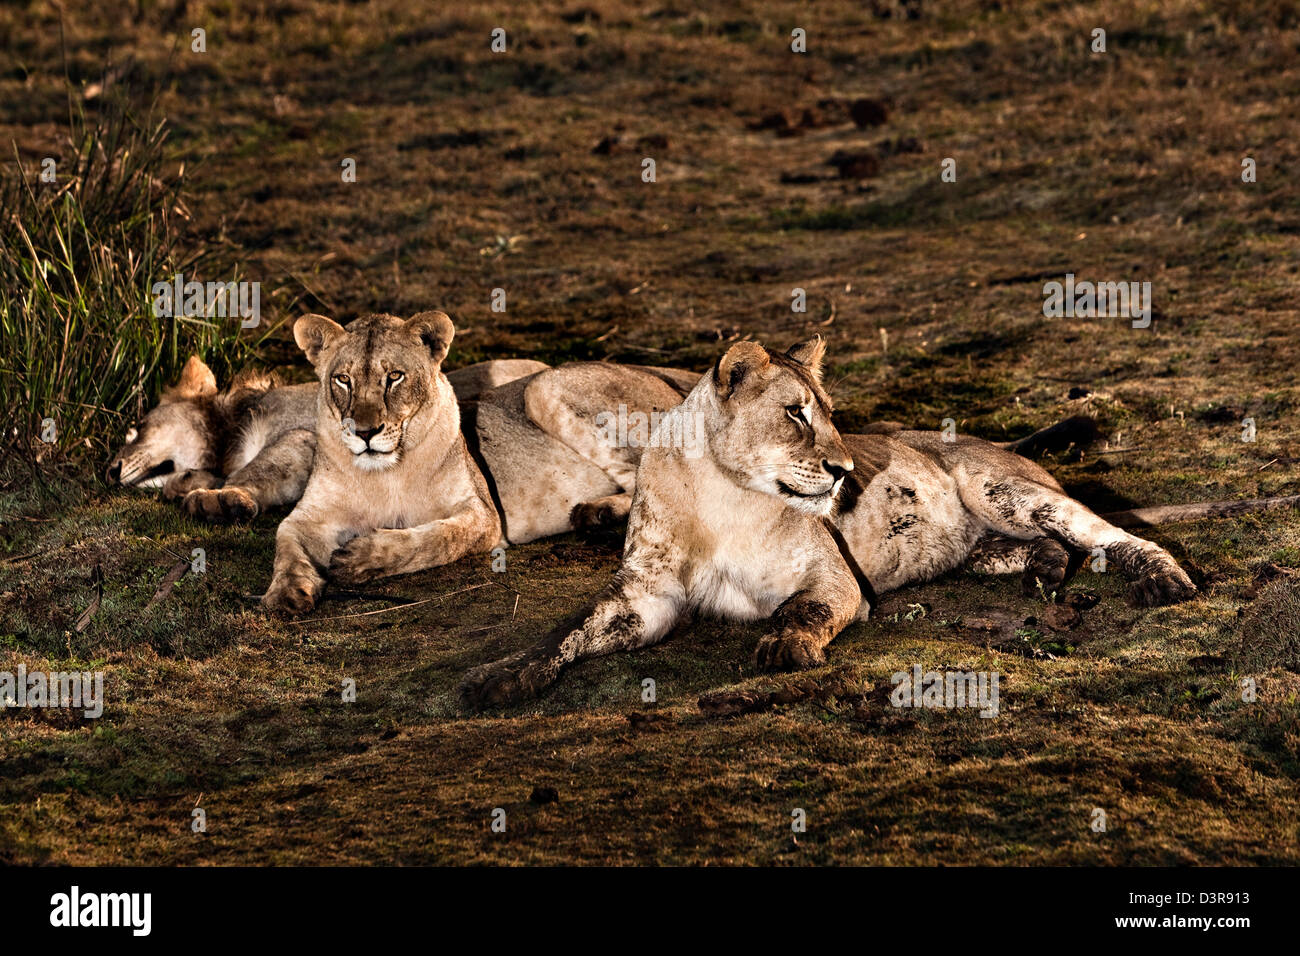 Lions sitting in mud, Phinda Game Reserve, South Africa Stock Photo